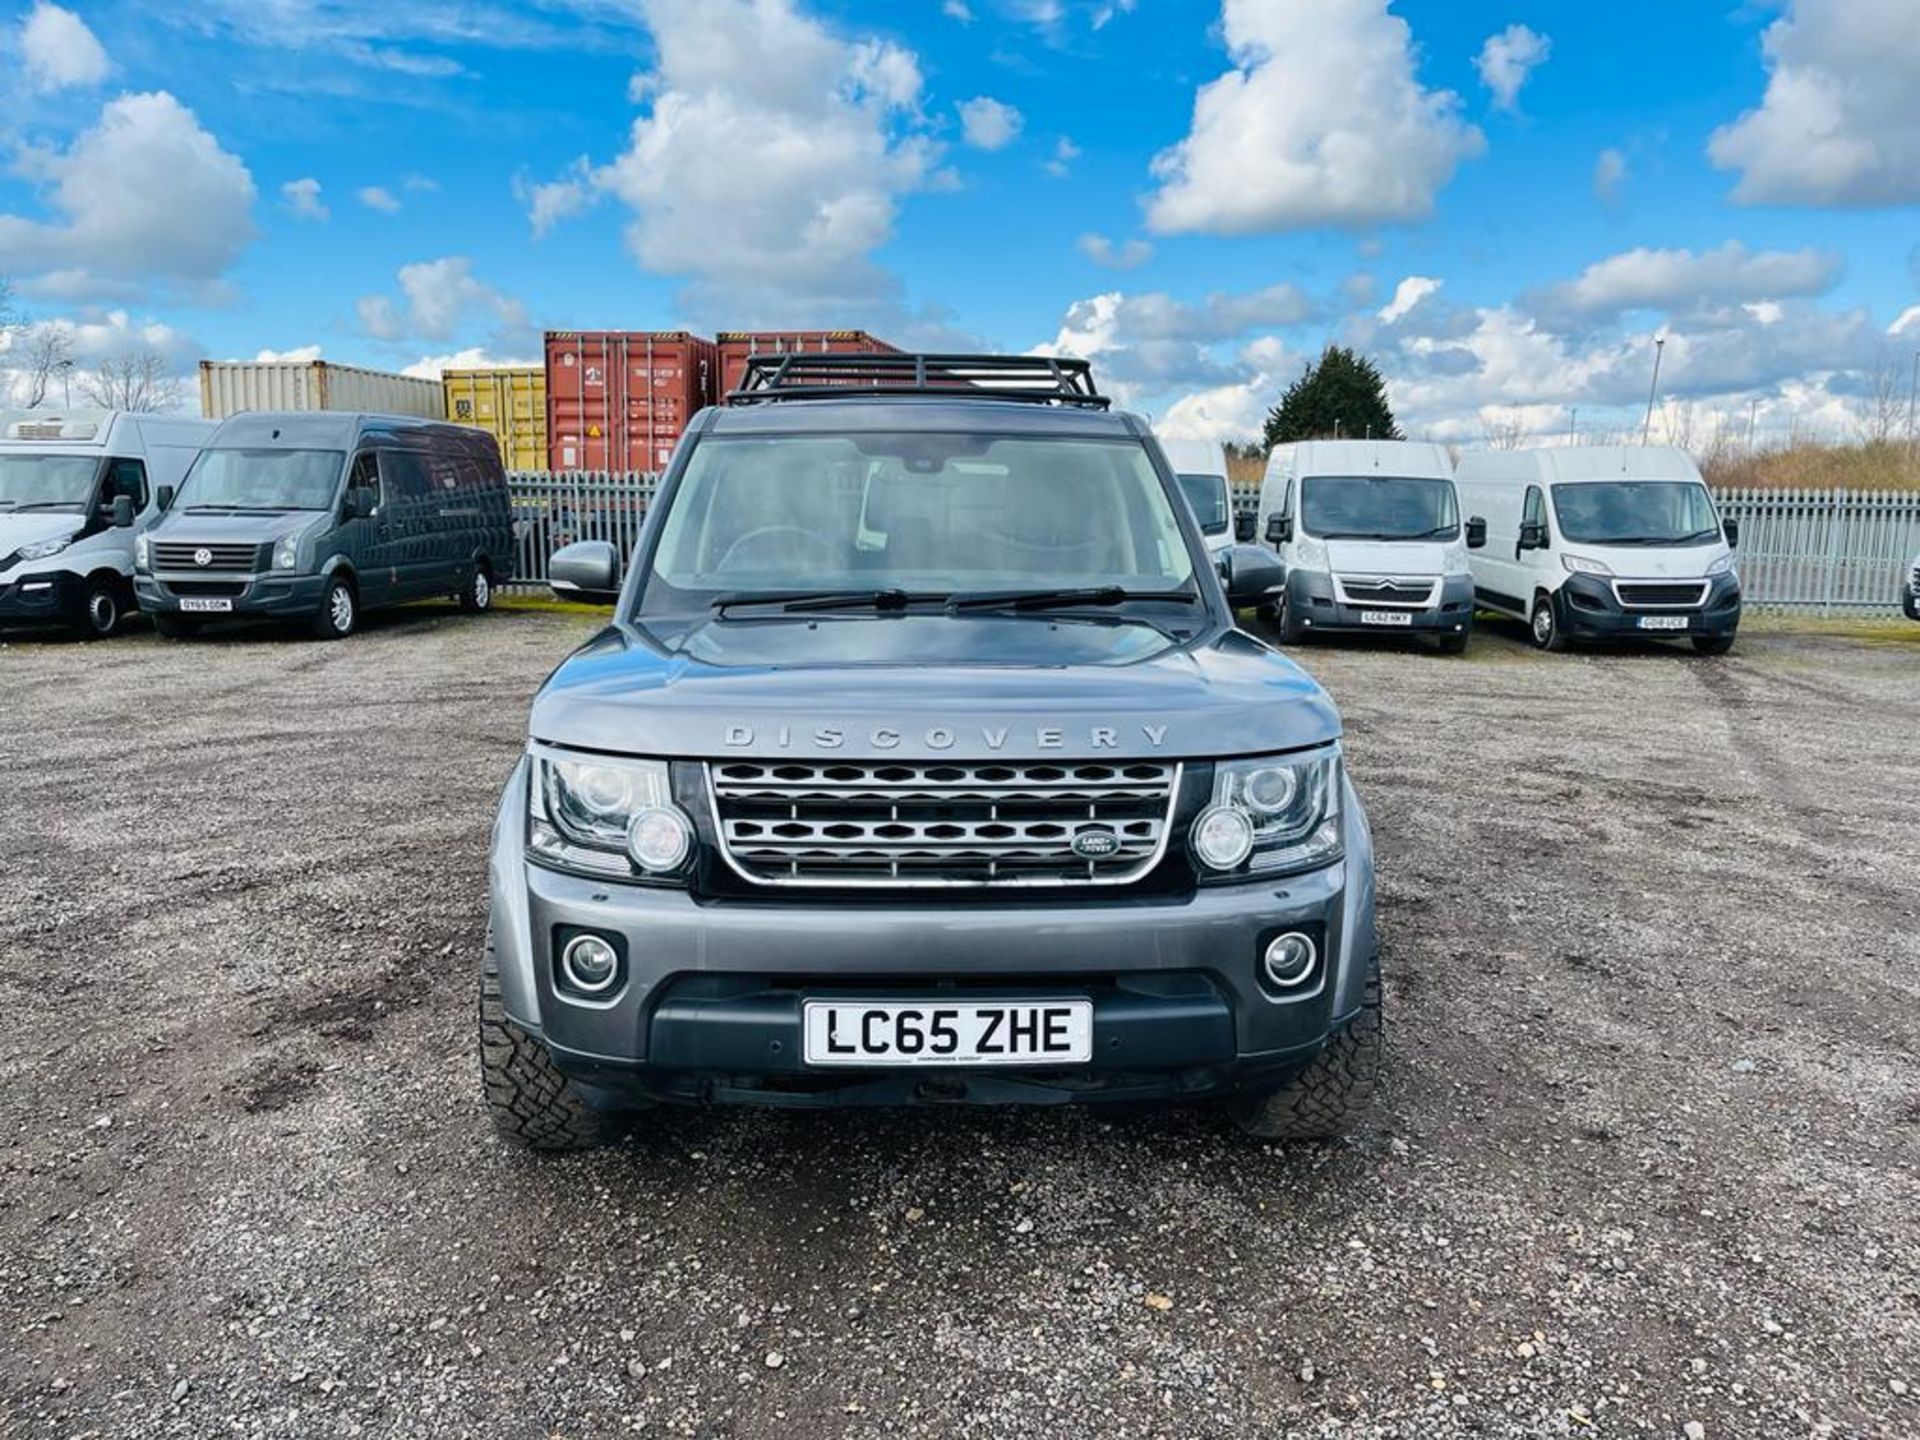 **ON SALE**Land Rover Discovery 3.0 SDV6 Auto SE 2016 '65 Reg' Sat Nav - 4WD - A/C -Only 97214 Miles - Image 2 of 26